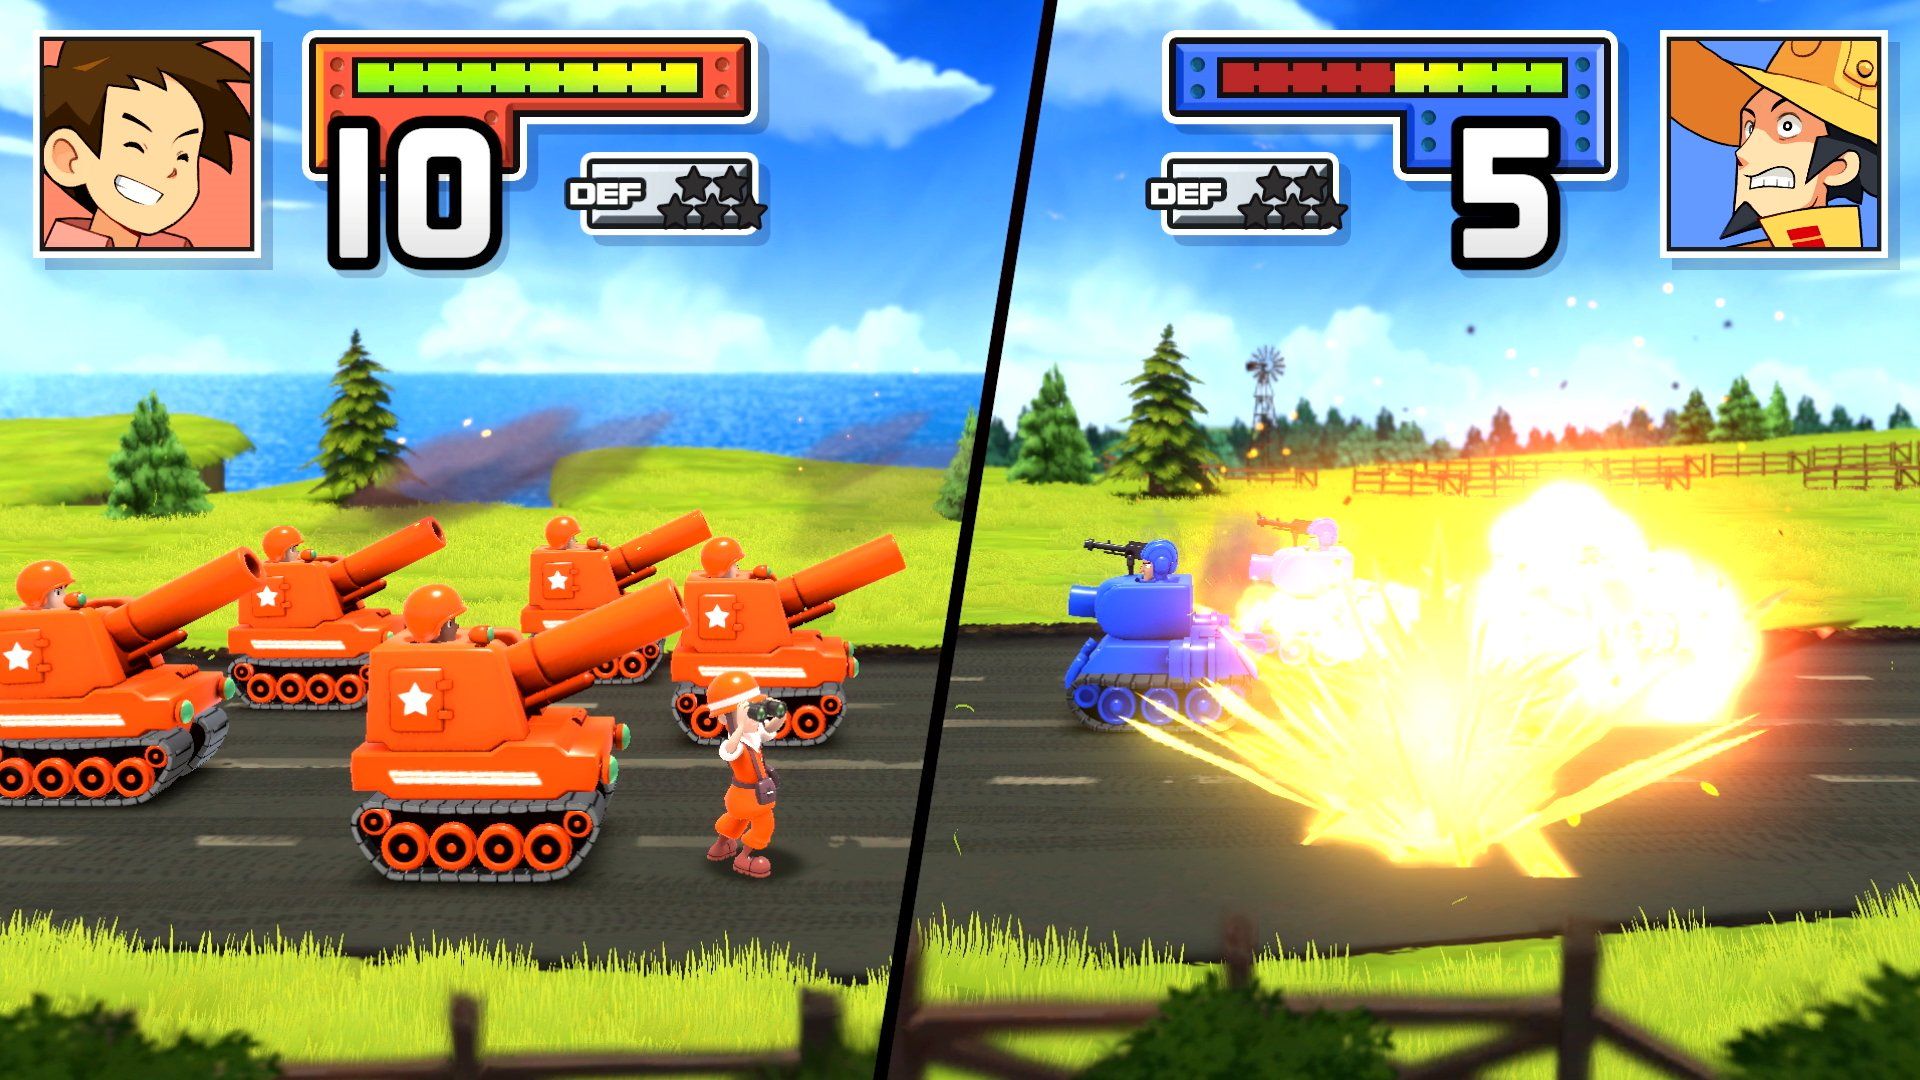 Video game screenshot of cartoonish red and blue tanks and artillery facing off